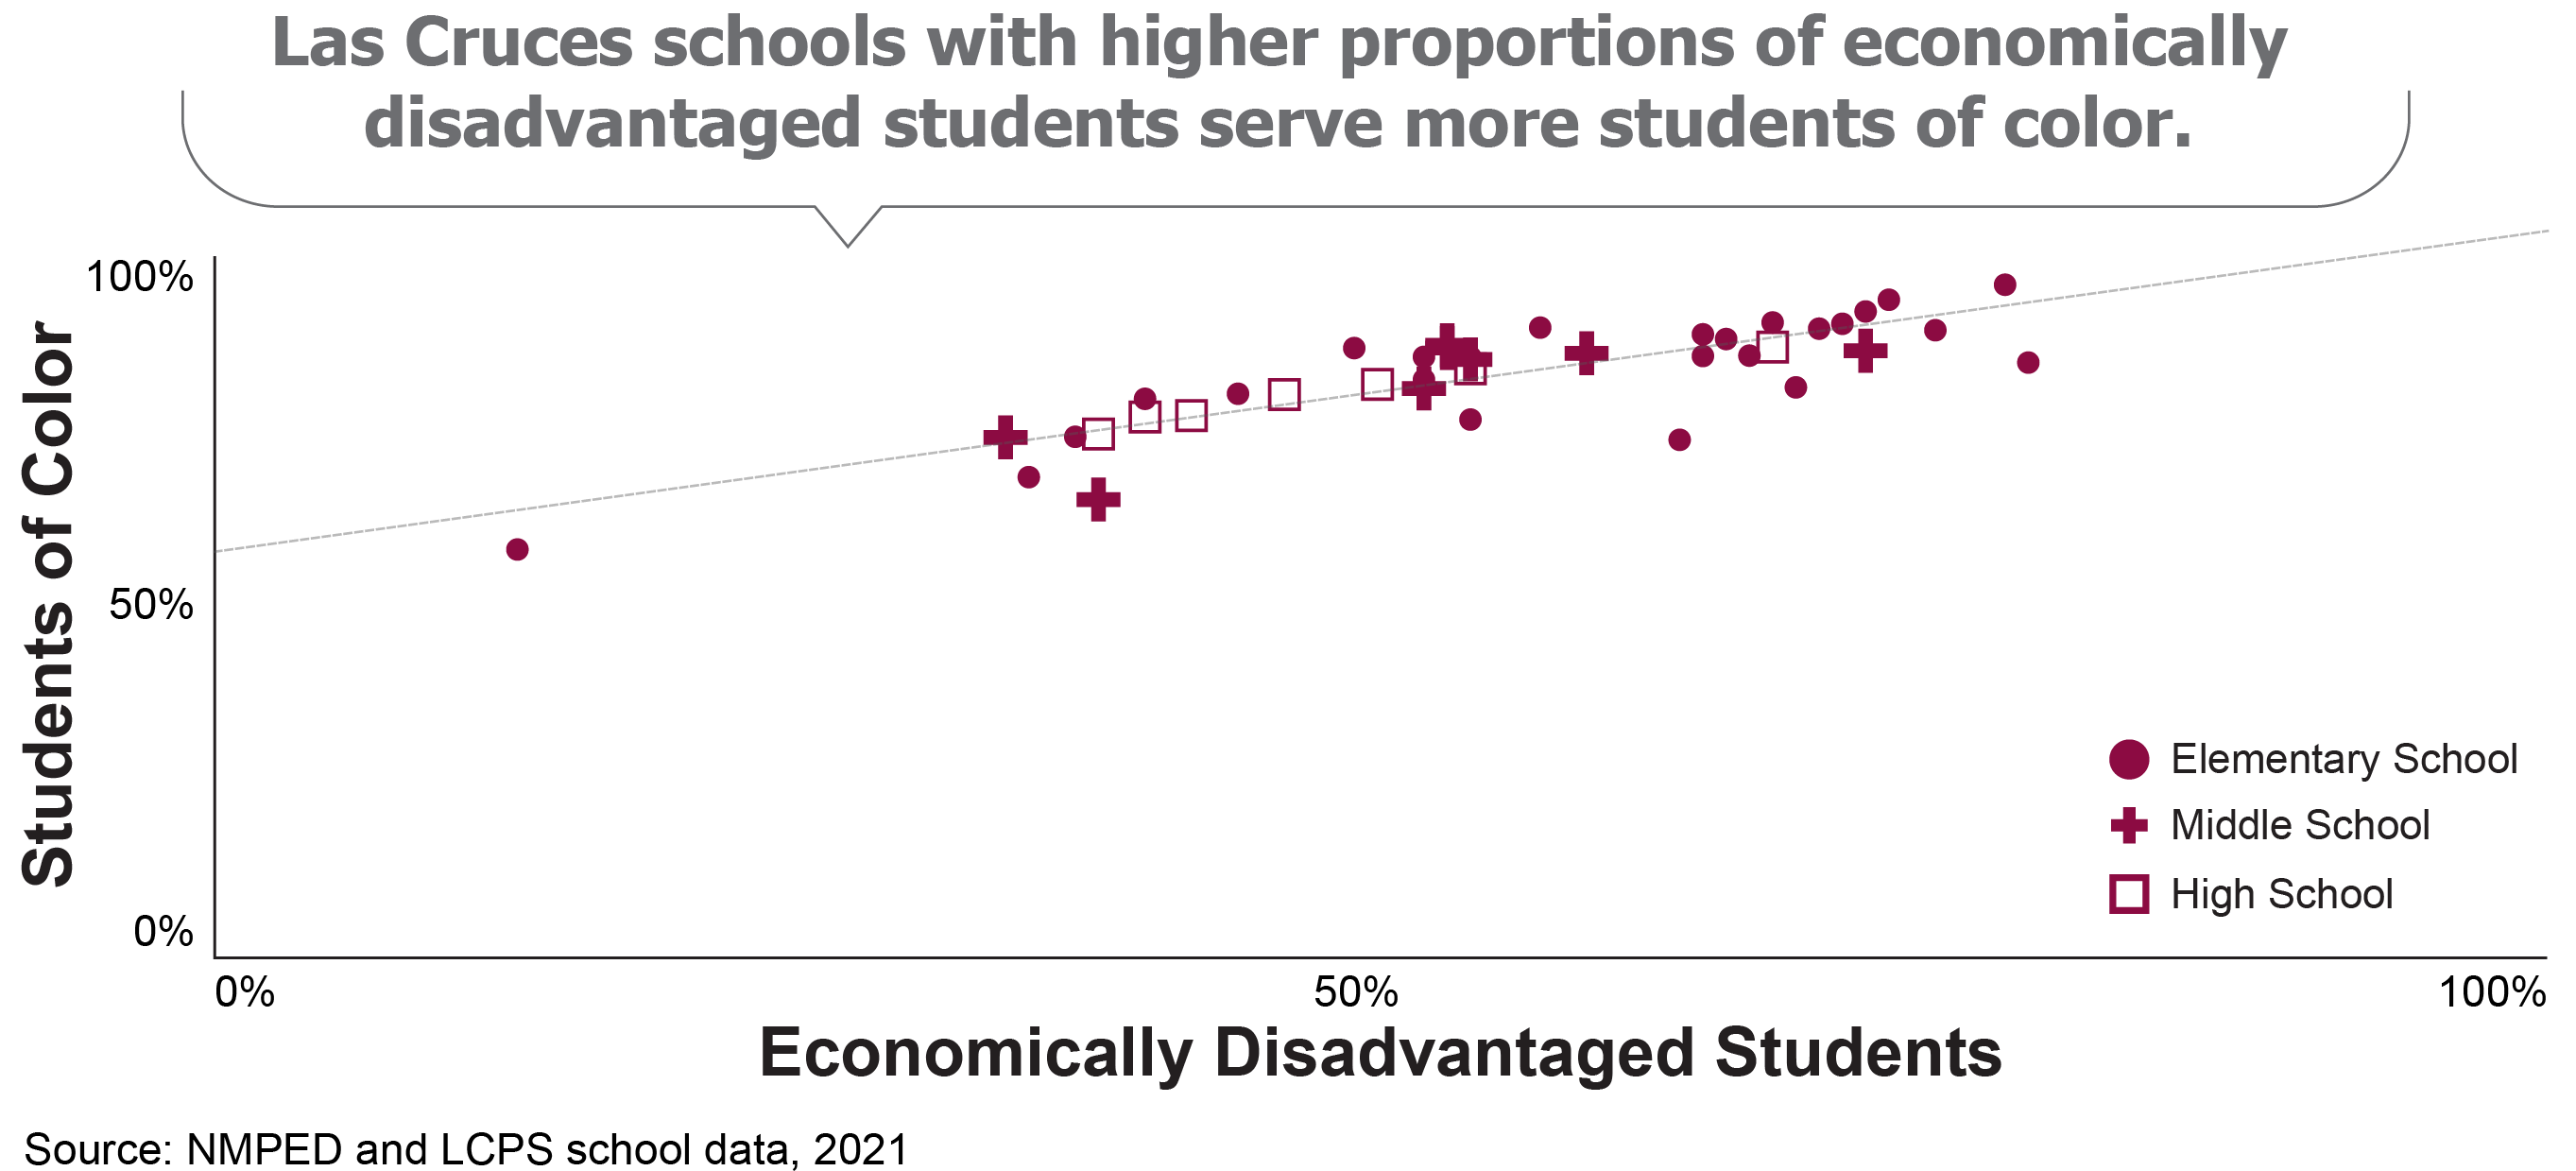 A scatterplot depicting the relationship between the proportion of students who are economically disadvantaged and the proportion who are students of color.  The scatterplot shows that in Las Cruces elementary, middle, and high schools, there is a positive correlation between the two proportions.